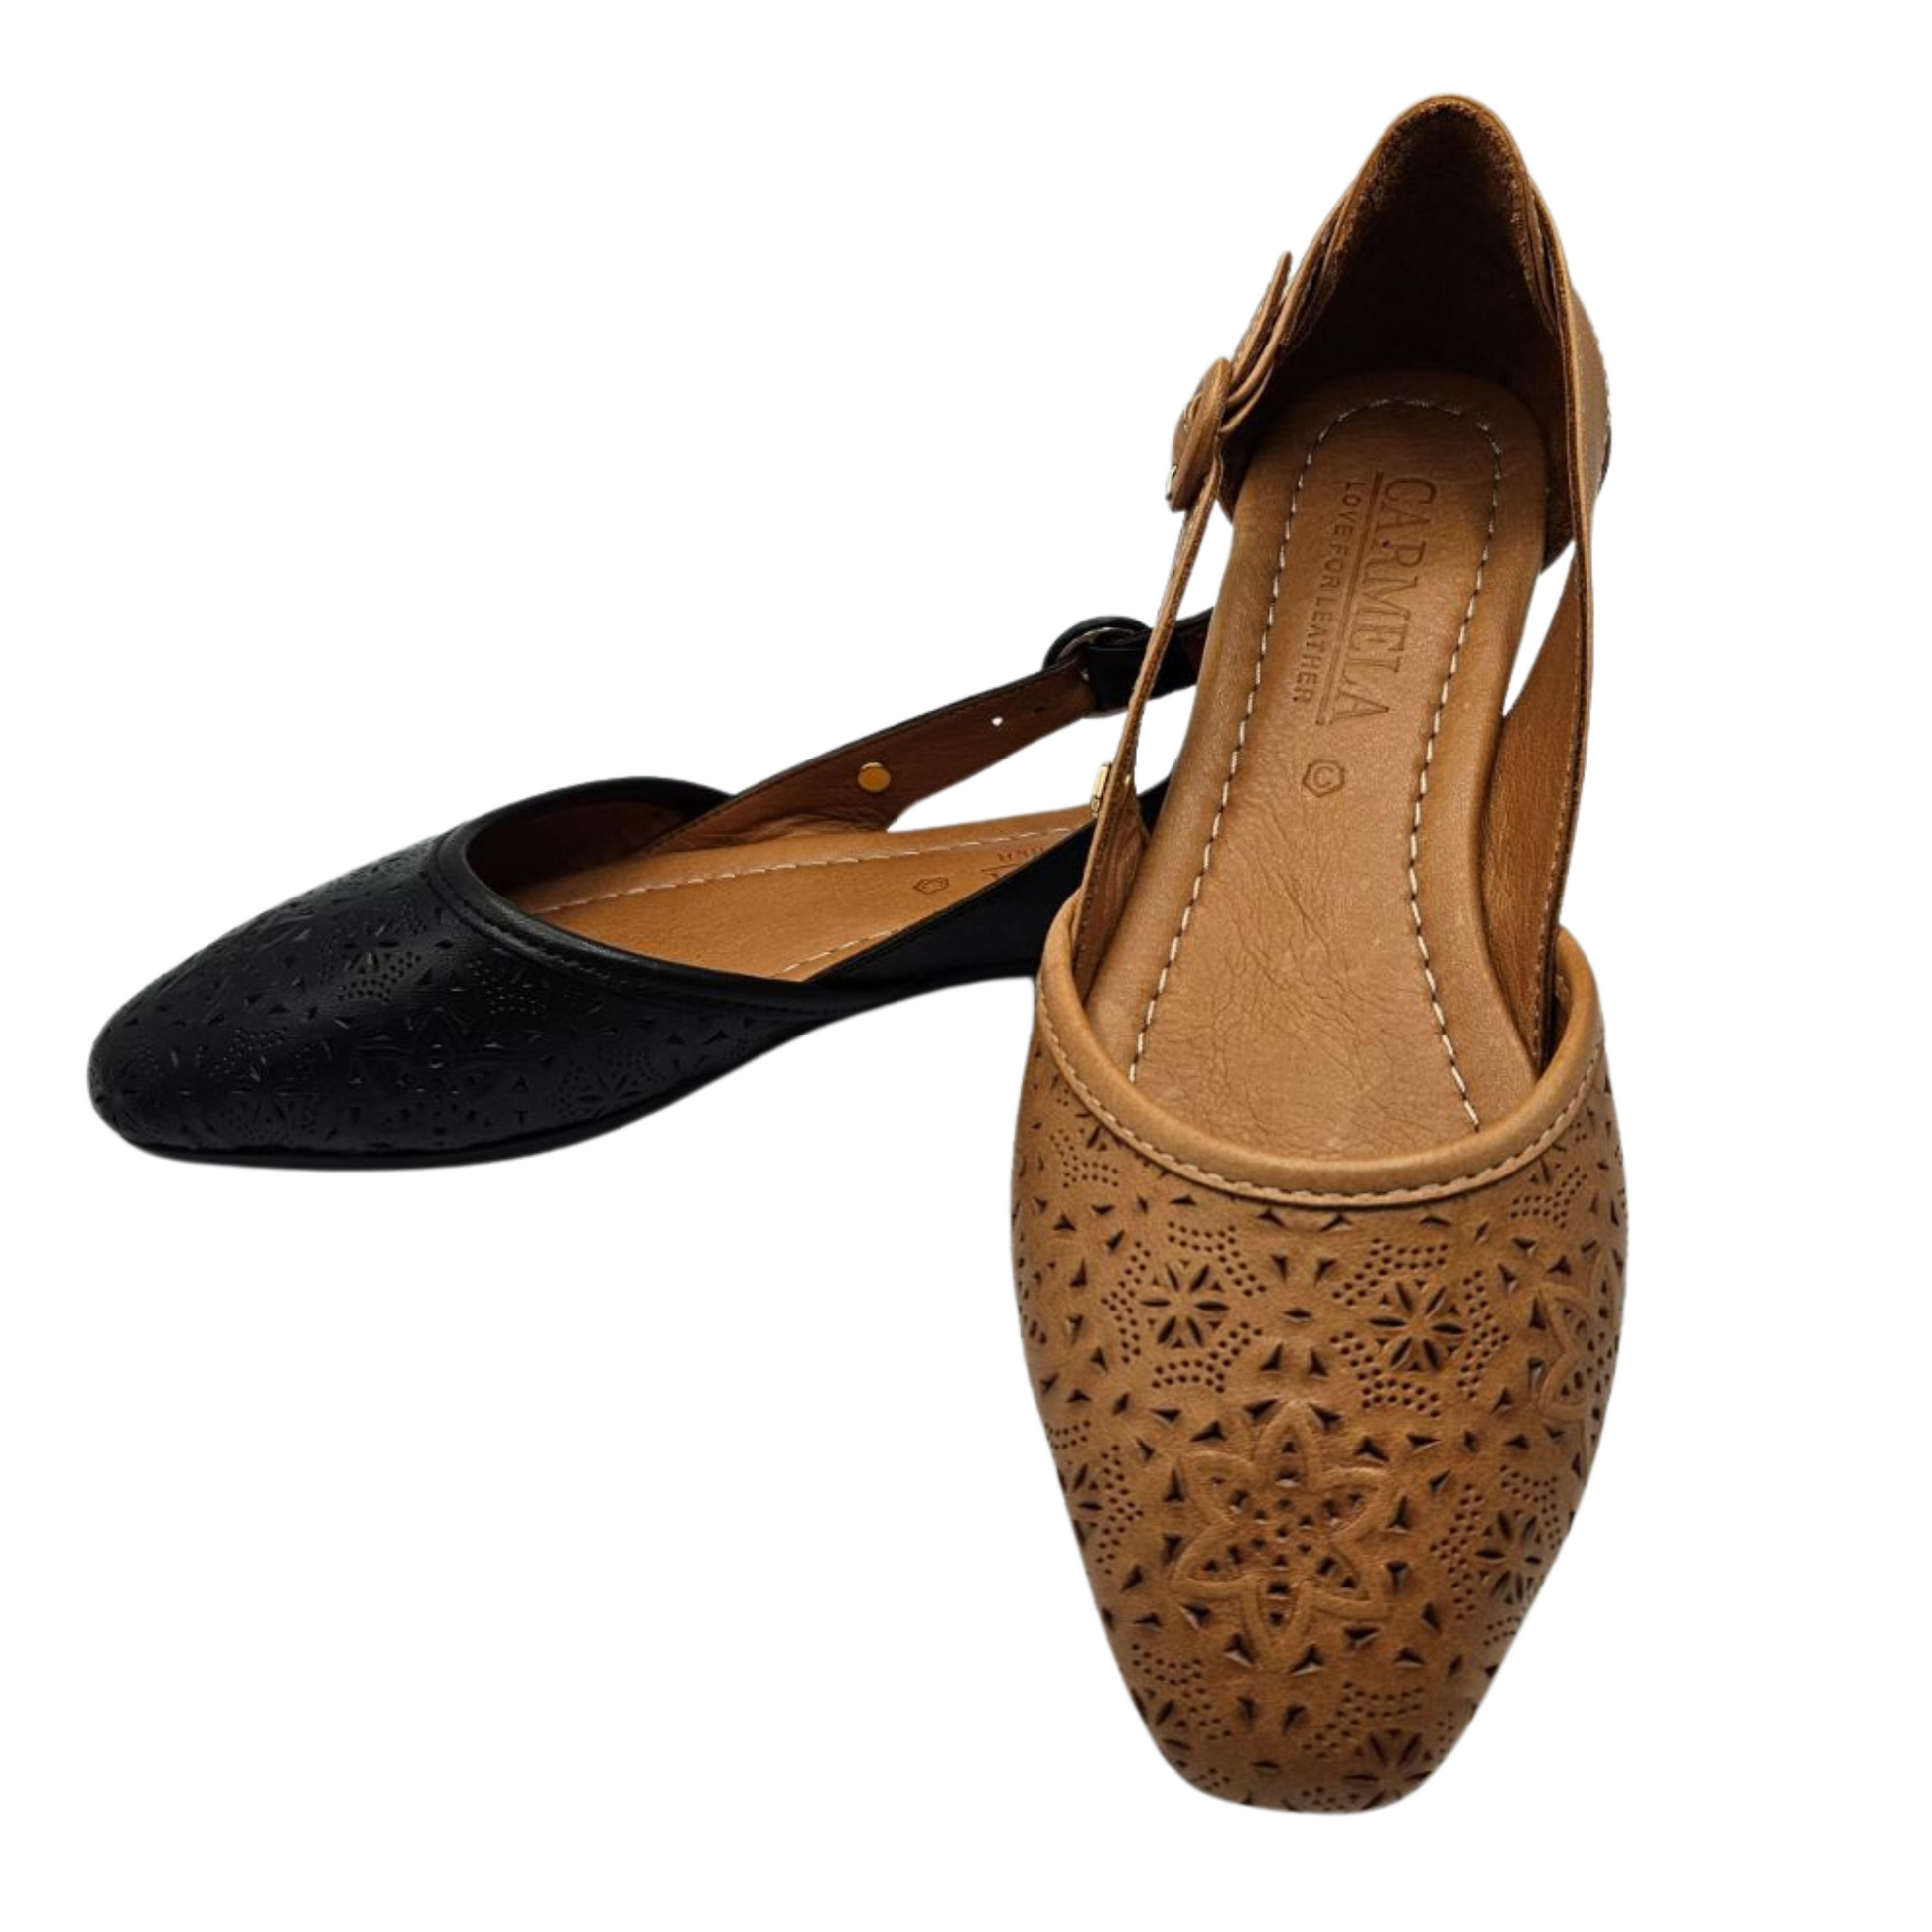 A view of two leather flat shoes. The one in the back ground is black and the one in the foreground is tan. Both have perforated floral designs on the front and adjustable side buckle straps. Slightly pointed toe and leather lined.